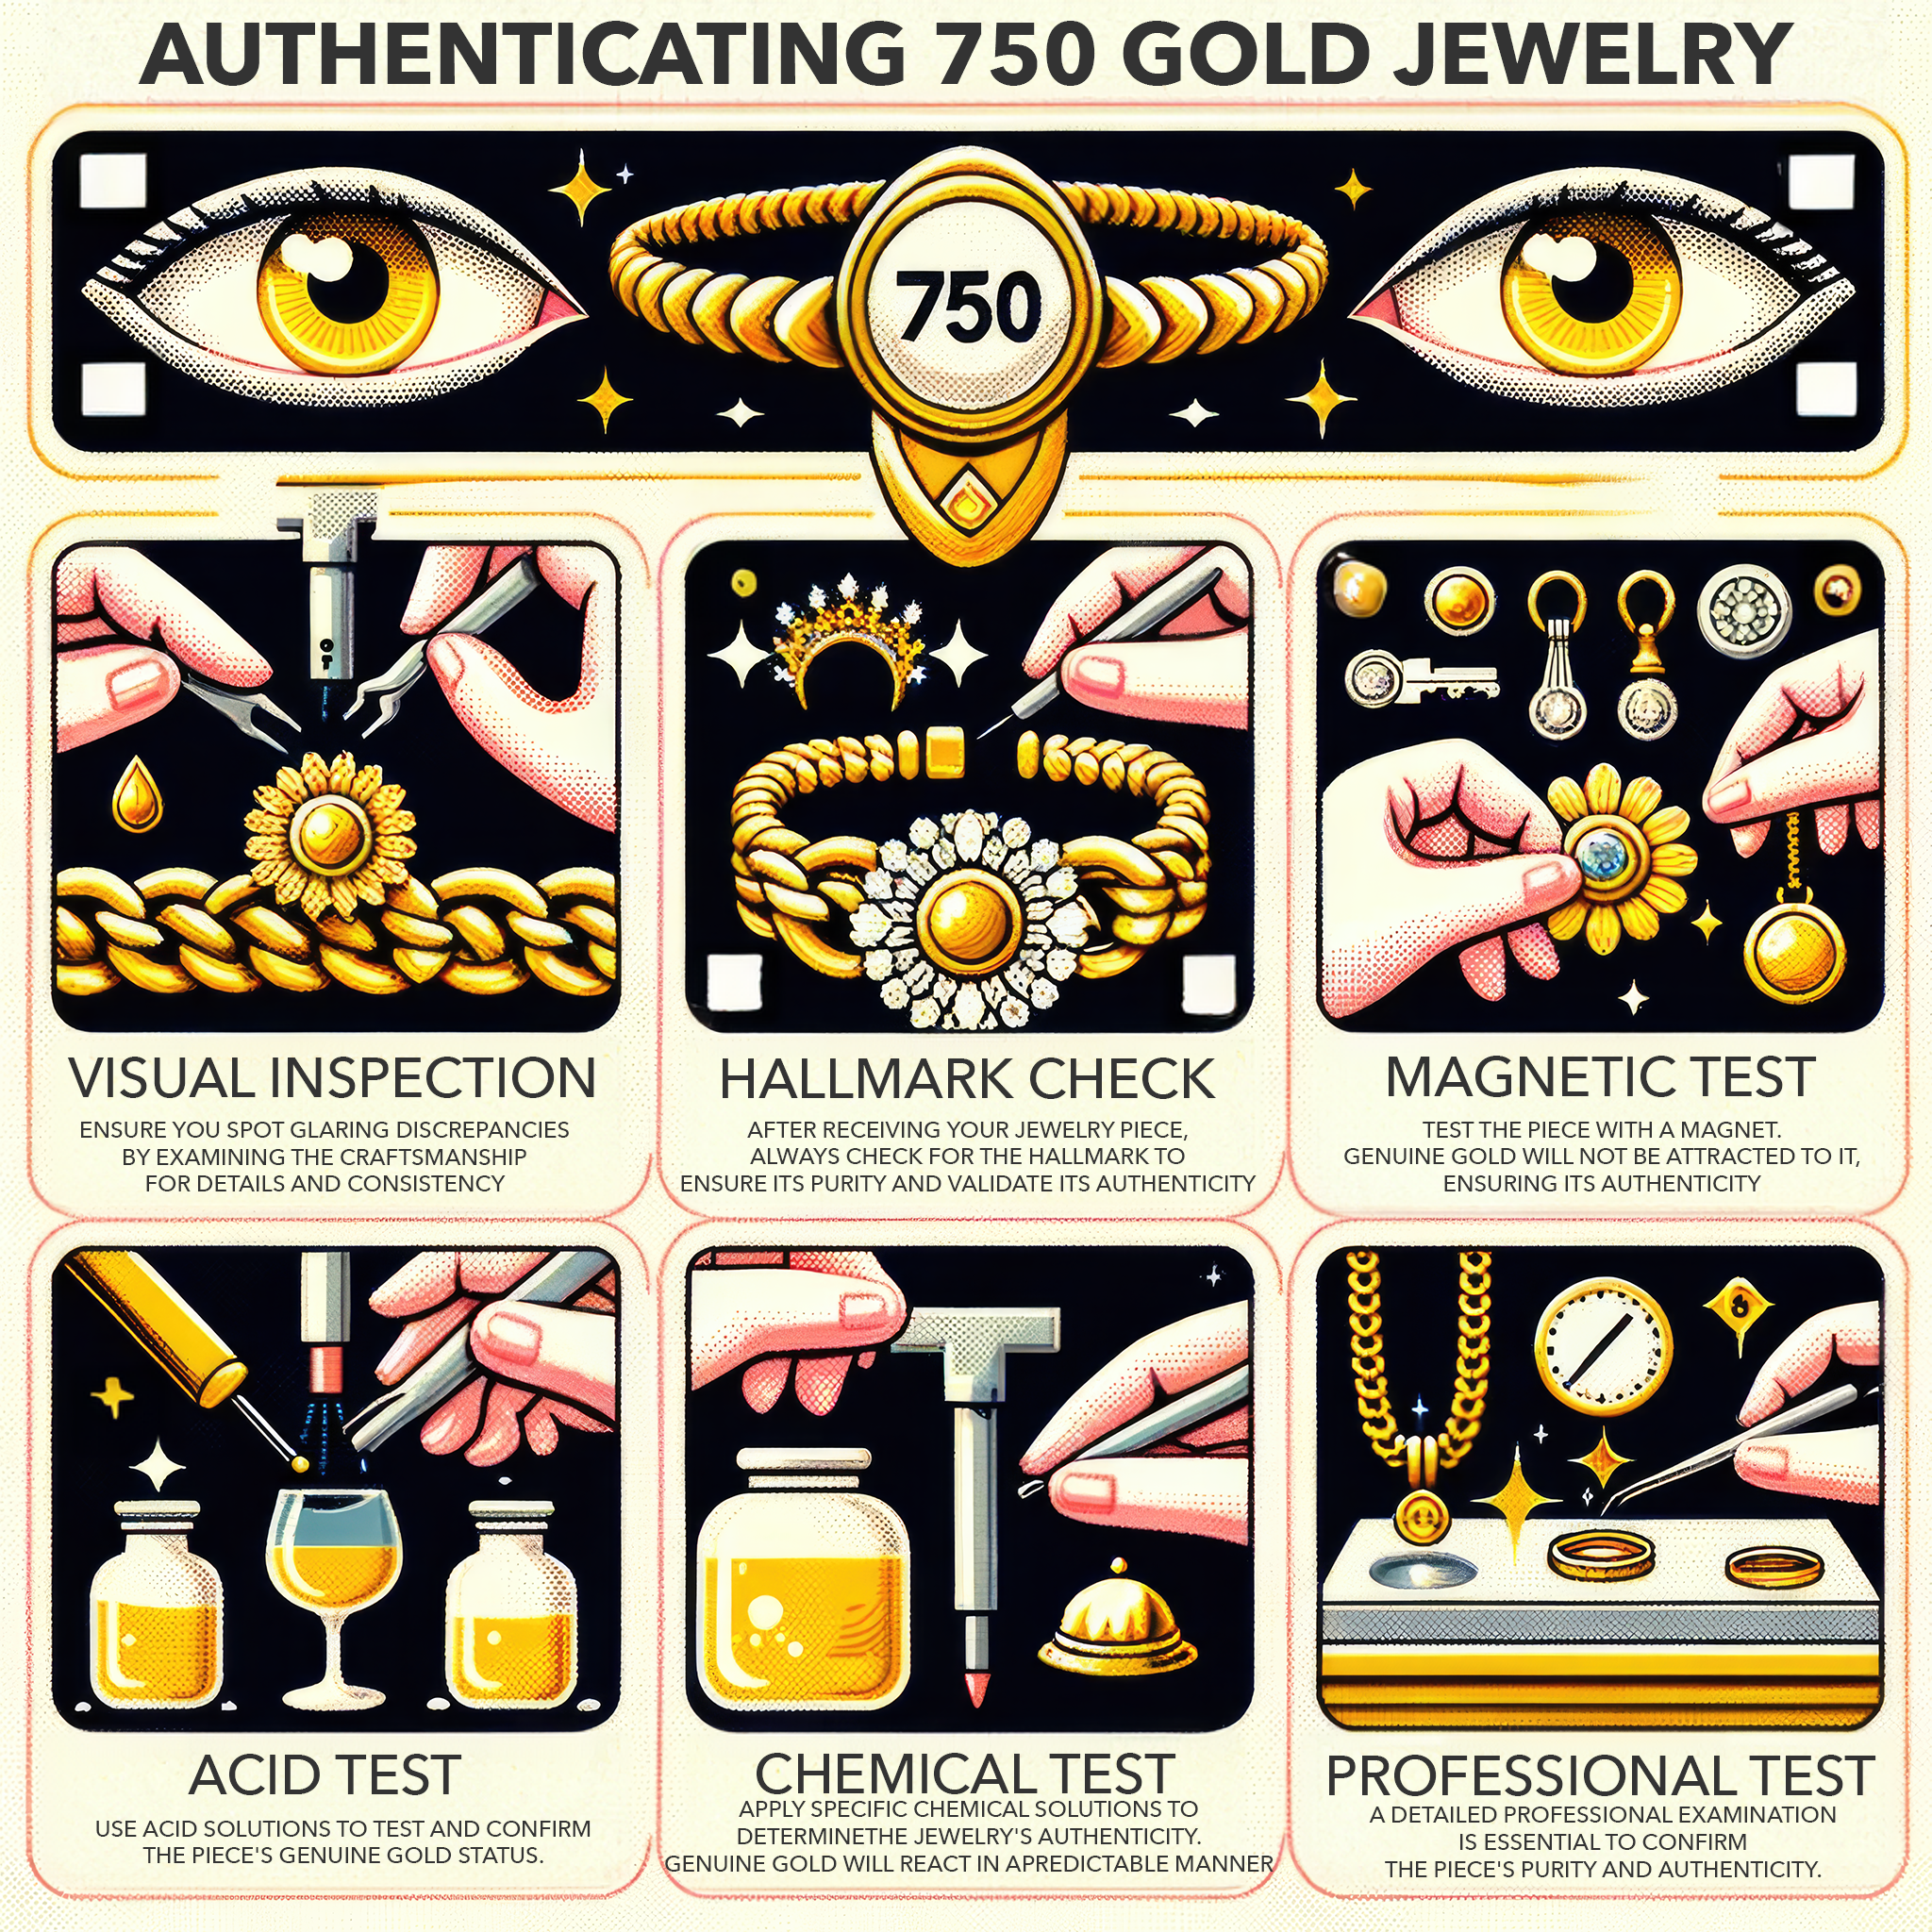 Infographic outlining six methods to authenticate 750 gold jewelry: visual inspection, hallmark check, magnet test, chemical test, acid test, and professional assessment.